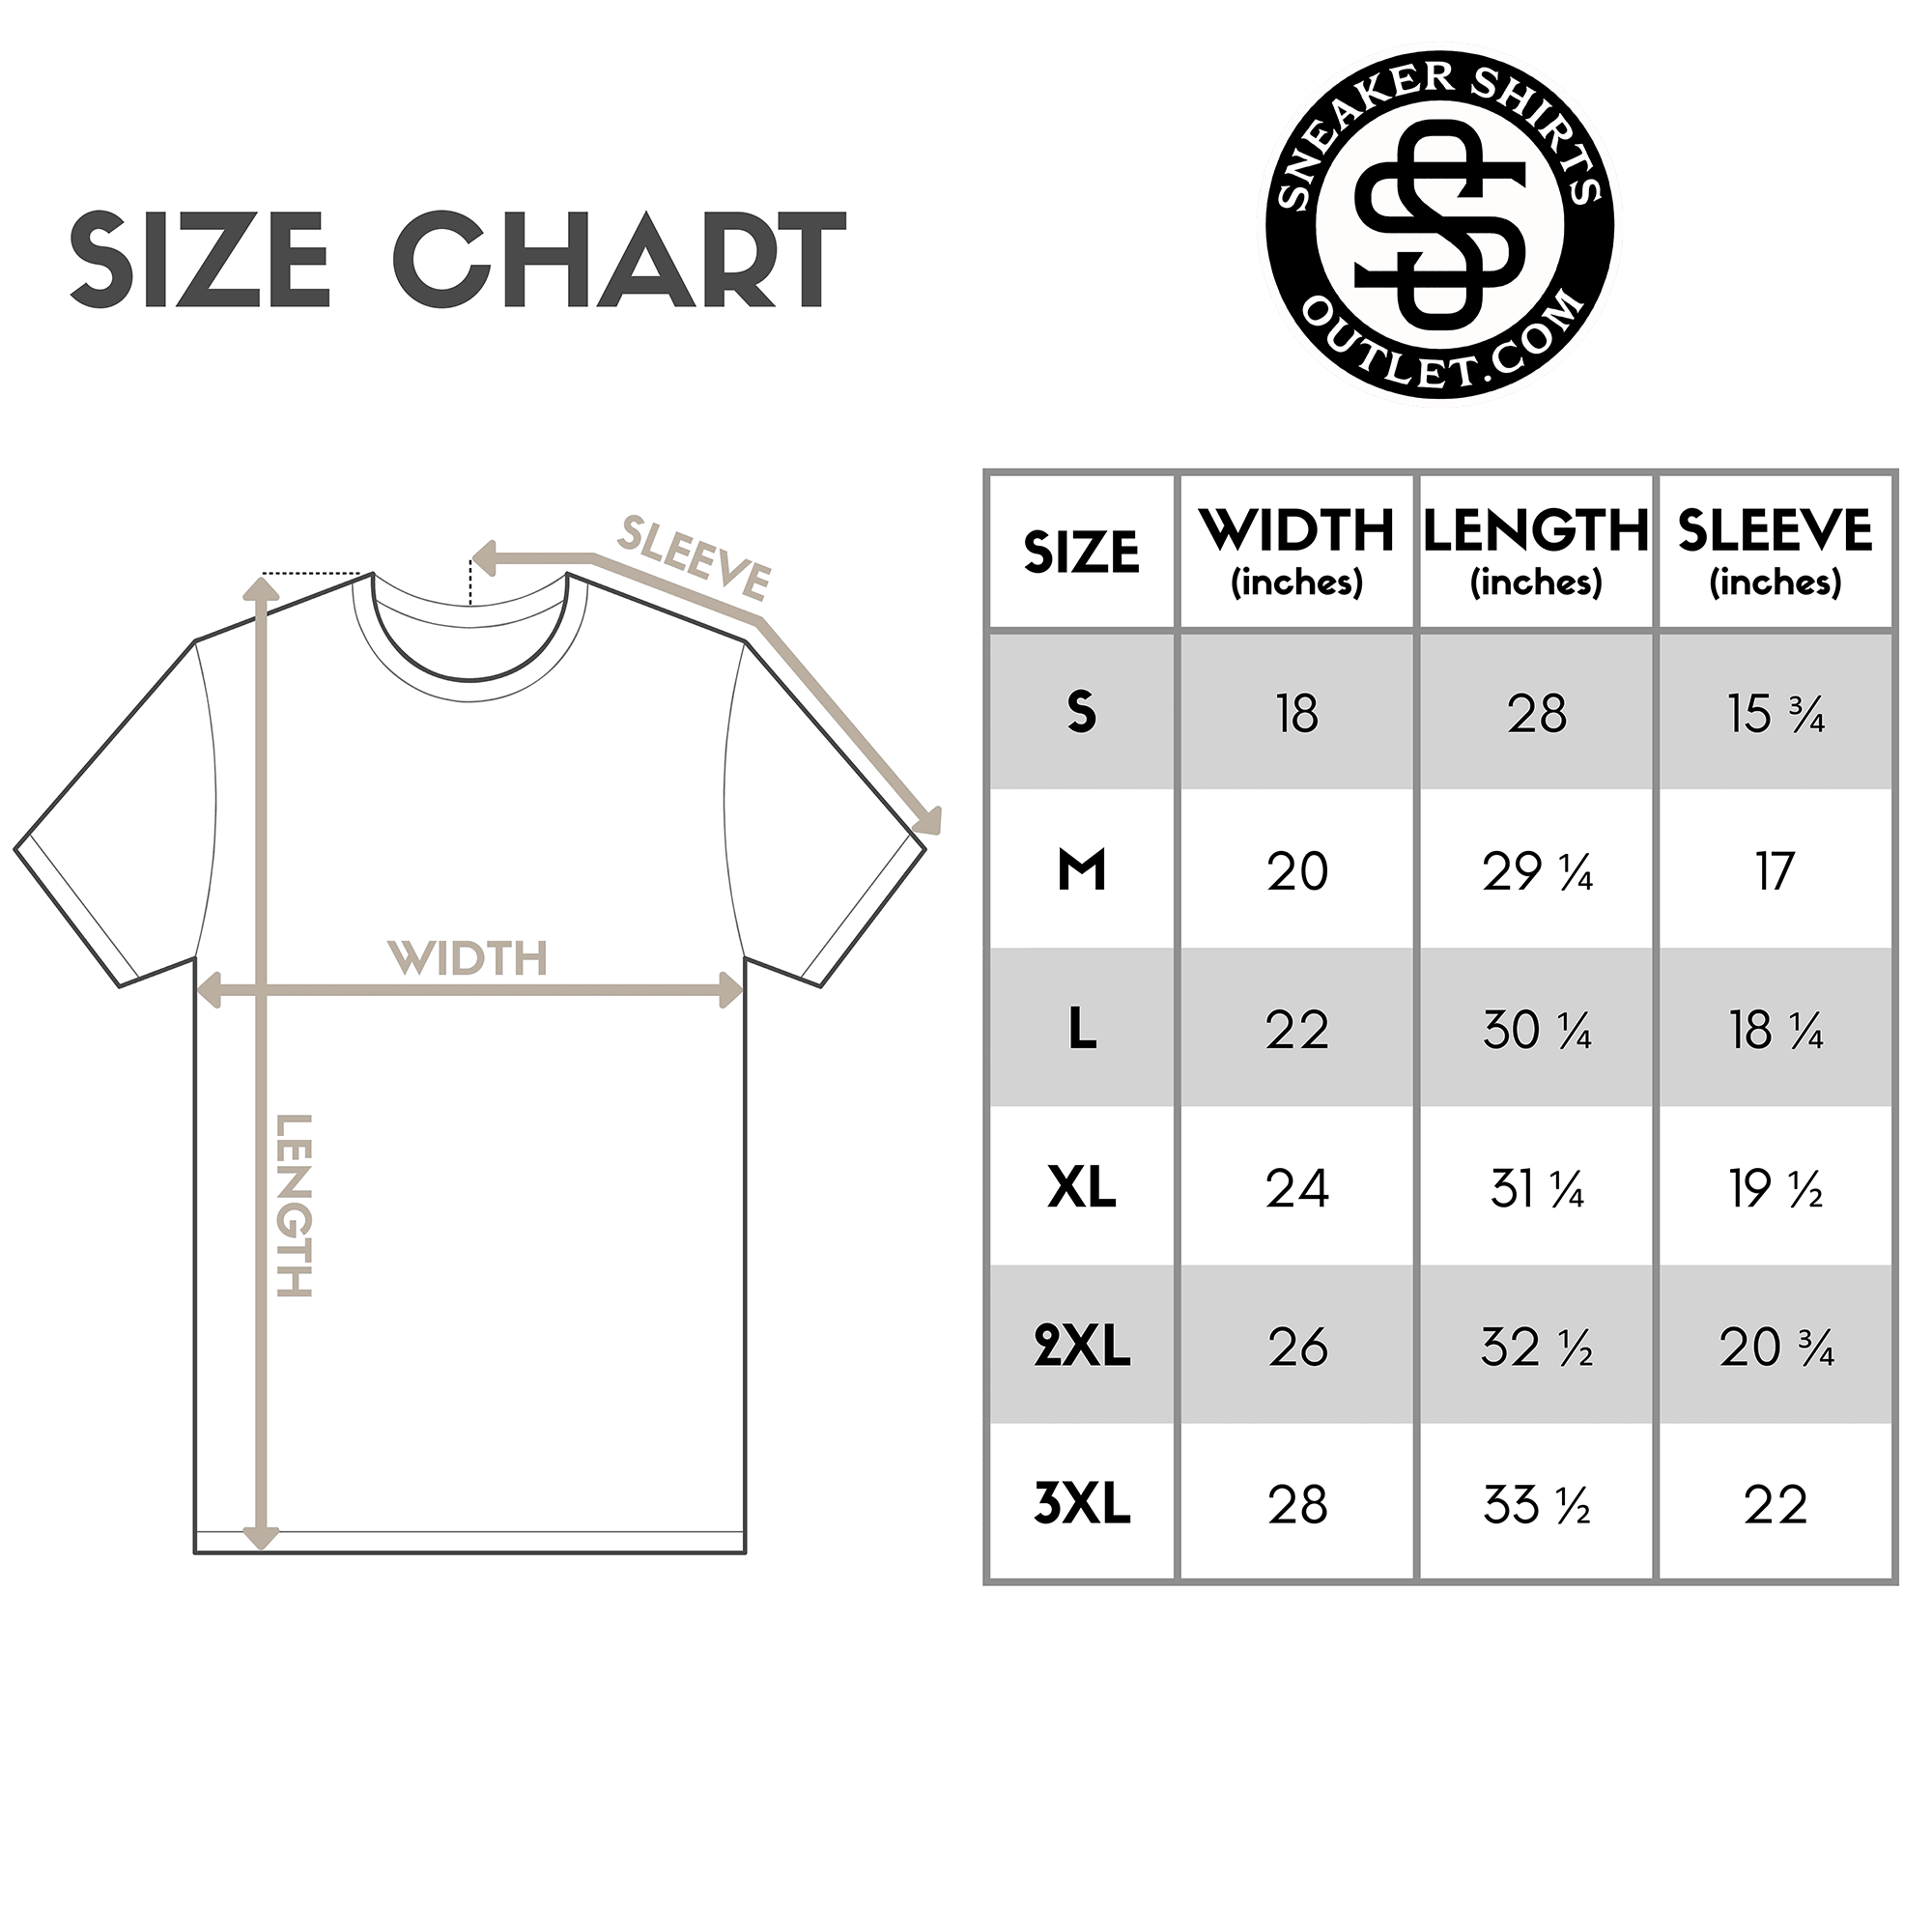 size chart Respect The Hustle Shirt Yeezy Boost 700s Bright Blue photo